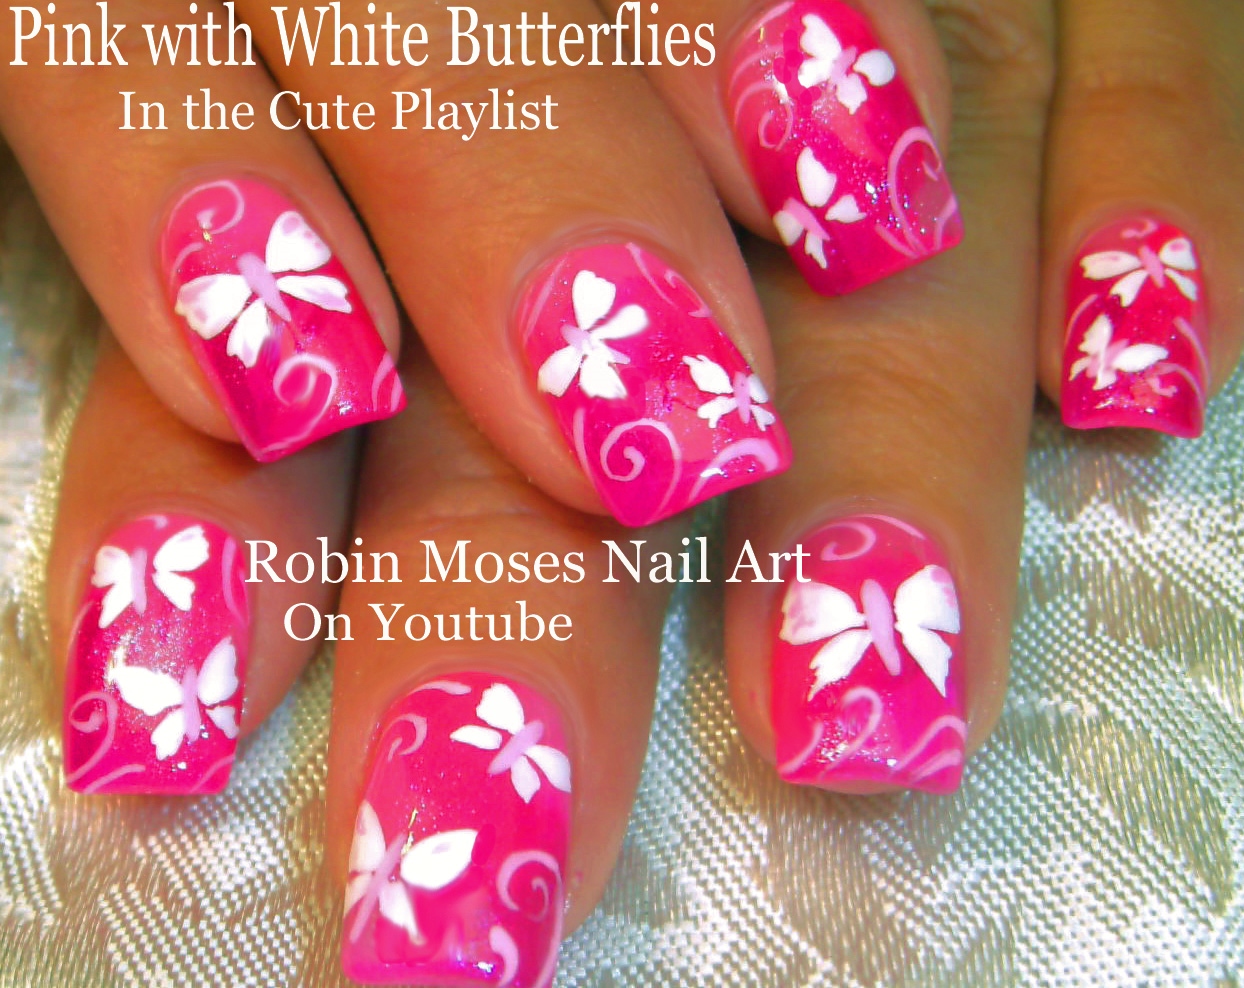 7. Glittery Butterfly Nails for a Glamorous Summer Look - wide 1